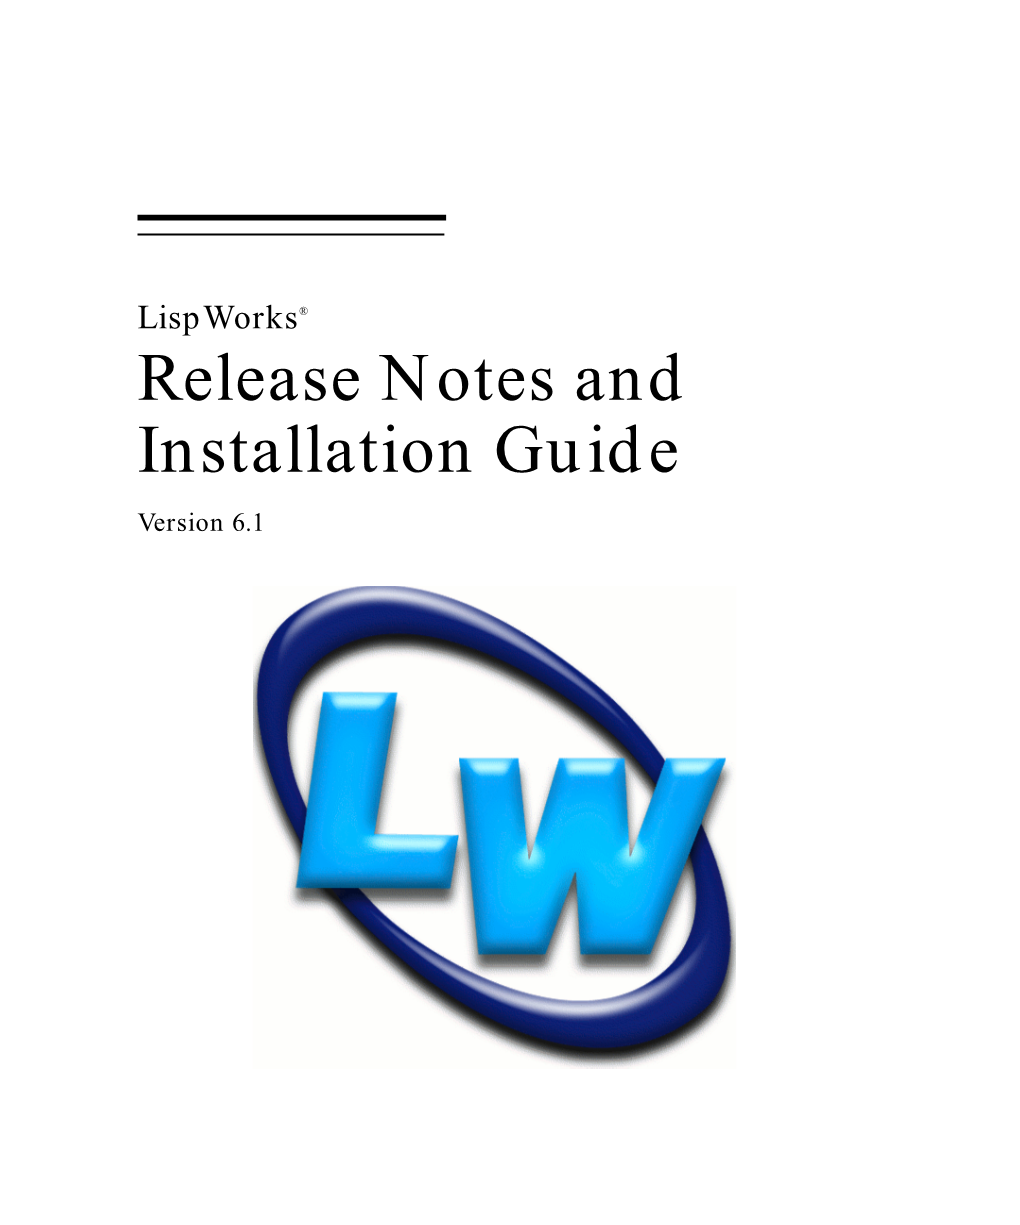 Release Notes and Installation Guide